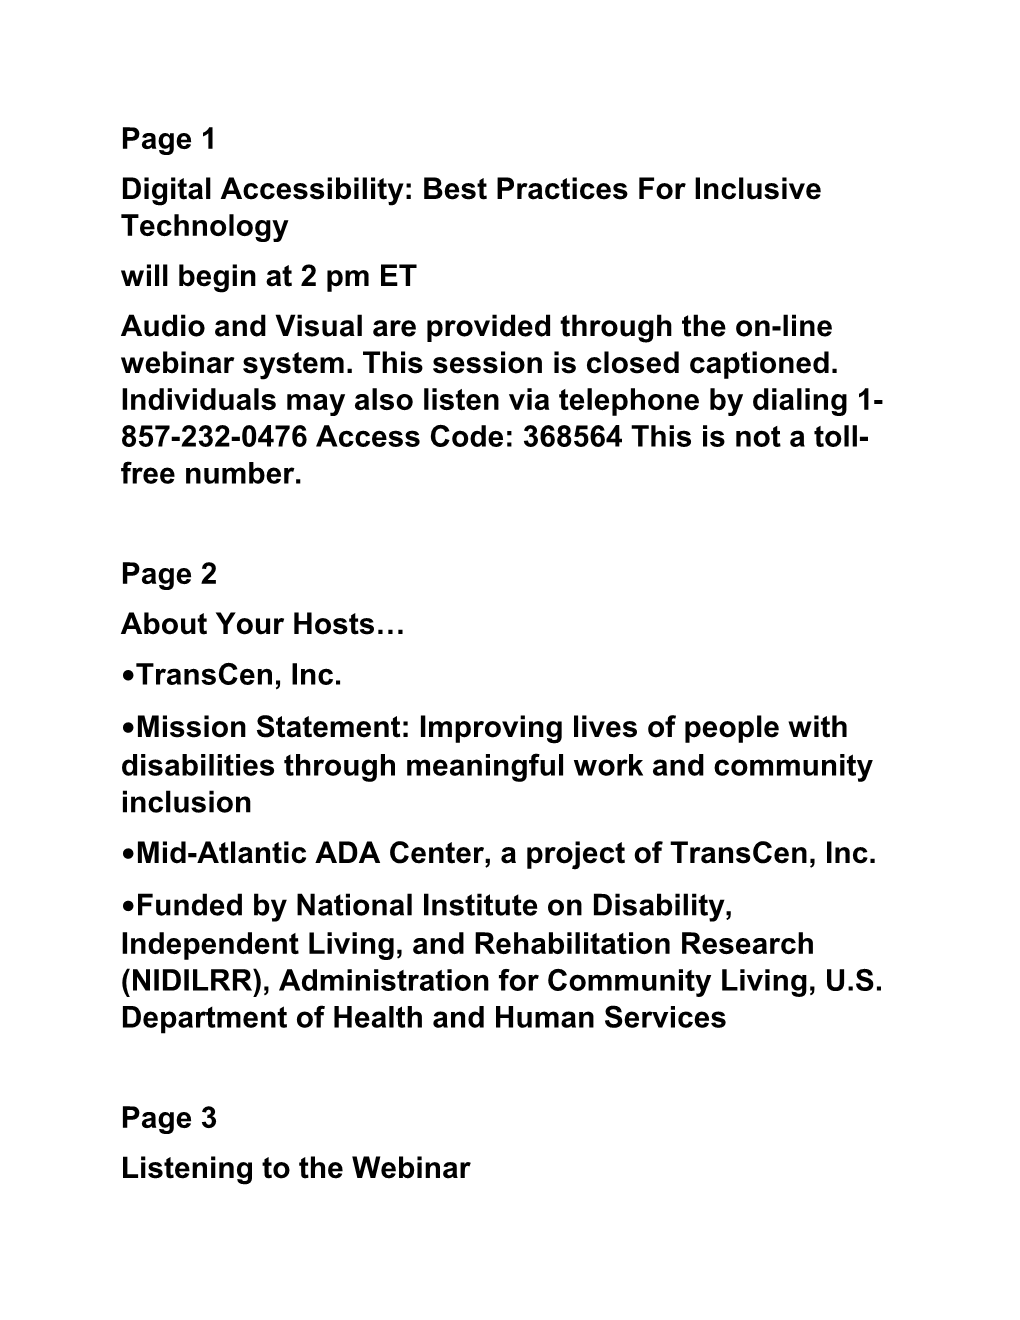 Digital Accessibility: Best Practices for Inclusive Technology